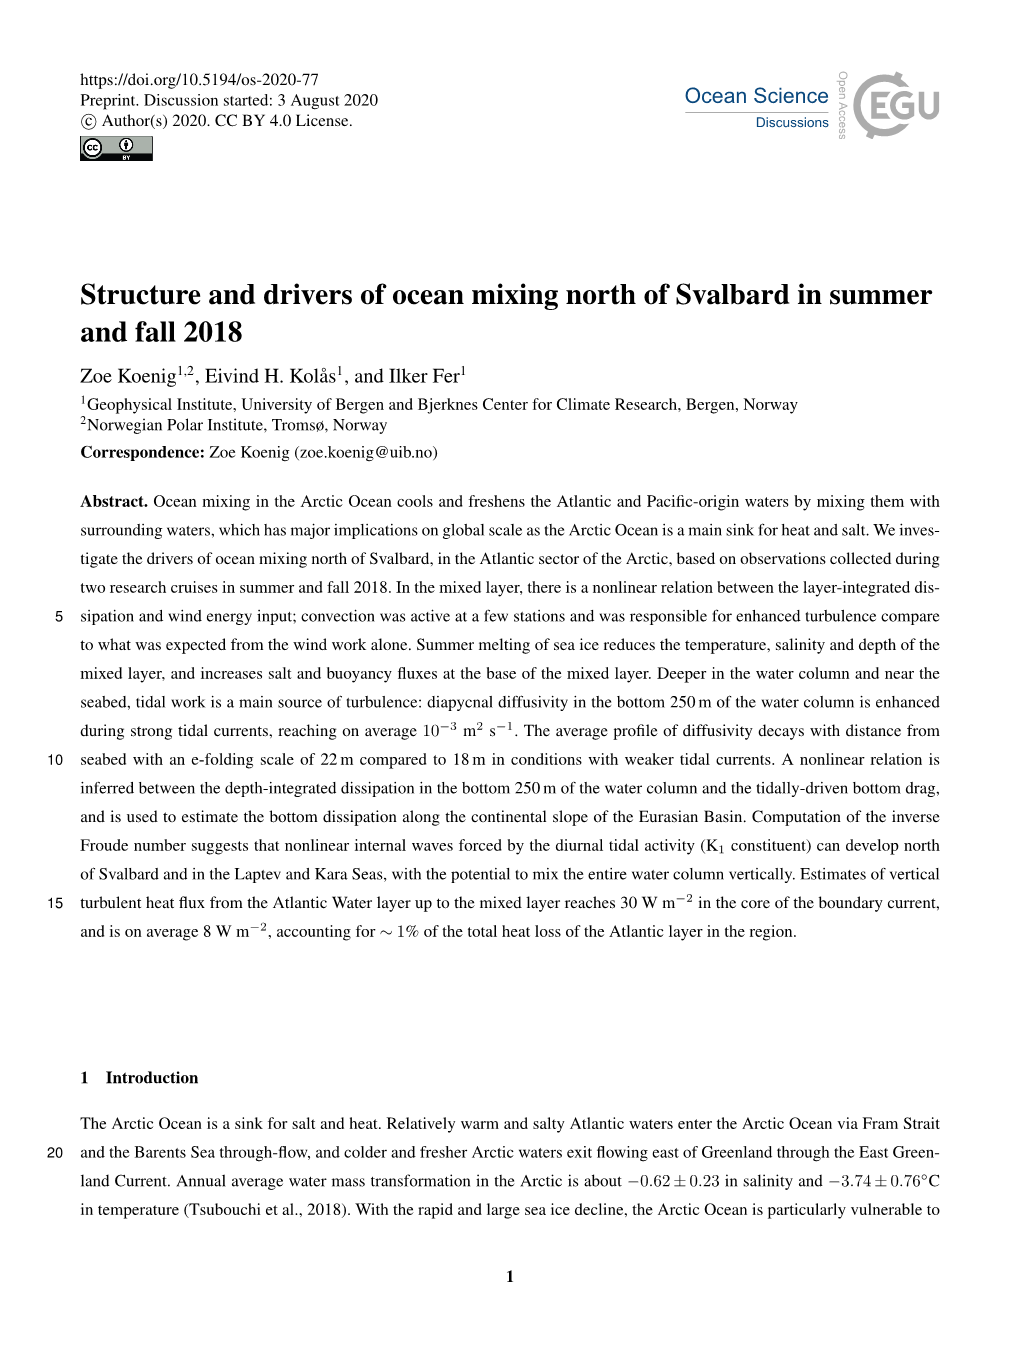 Structure and Drivers of Ocean Mixing North of Svalbard in Summer and Fall 2018 Zoe Koenig1,2, Eivind H